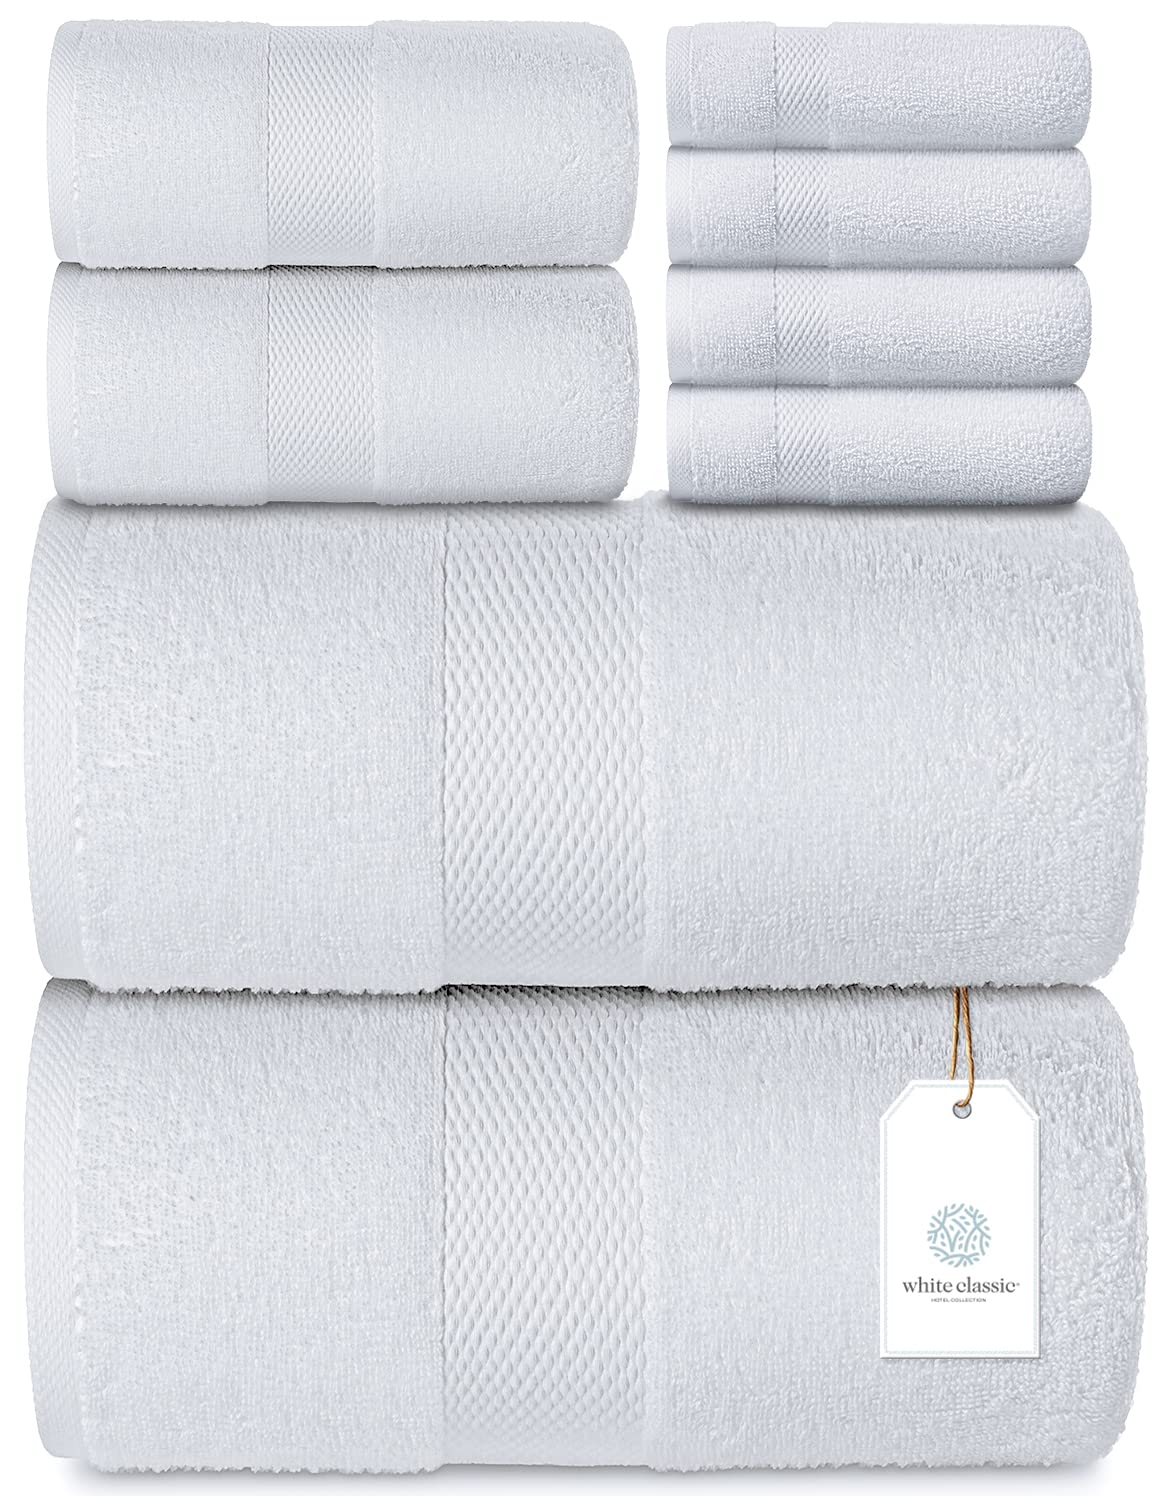 Luxury 8 Piece Bath Towel Set White - 700 GSM Thick Combed Cotton Hotel Quality Towels - 2 Bath Towels, 2 Hand Towels, 4 Washcloths  - Like New